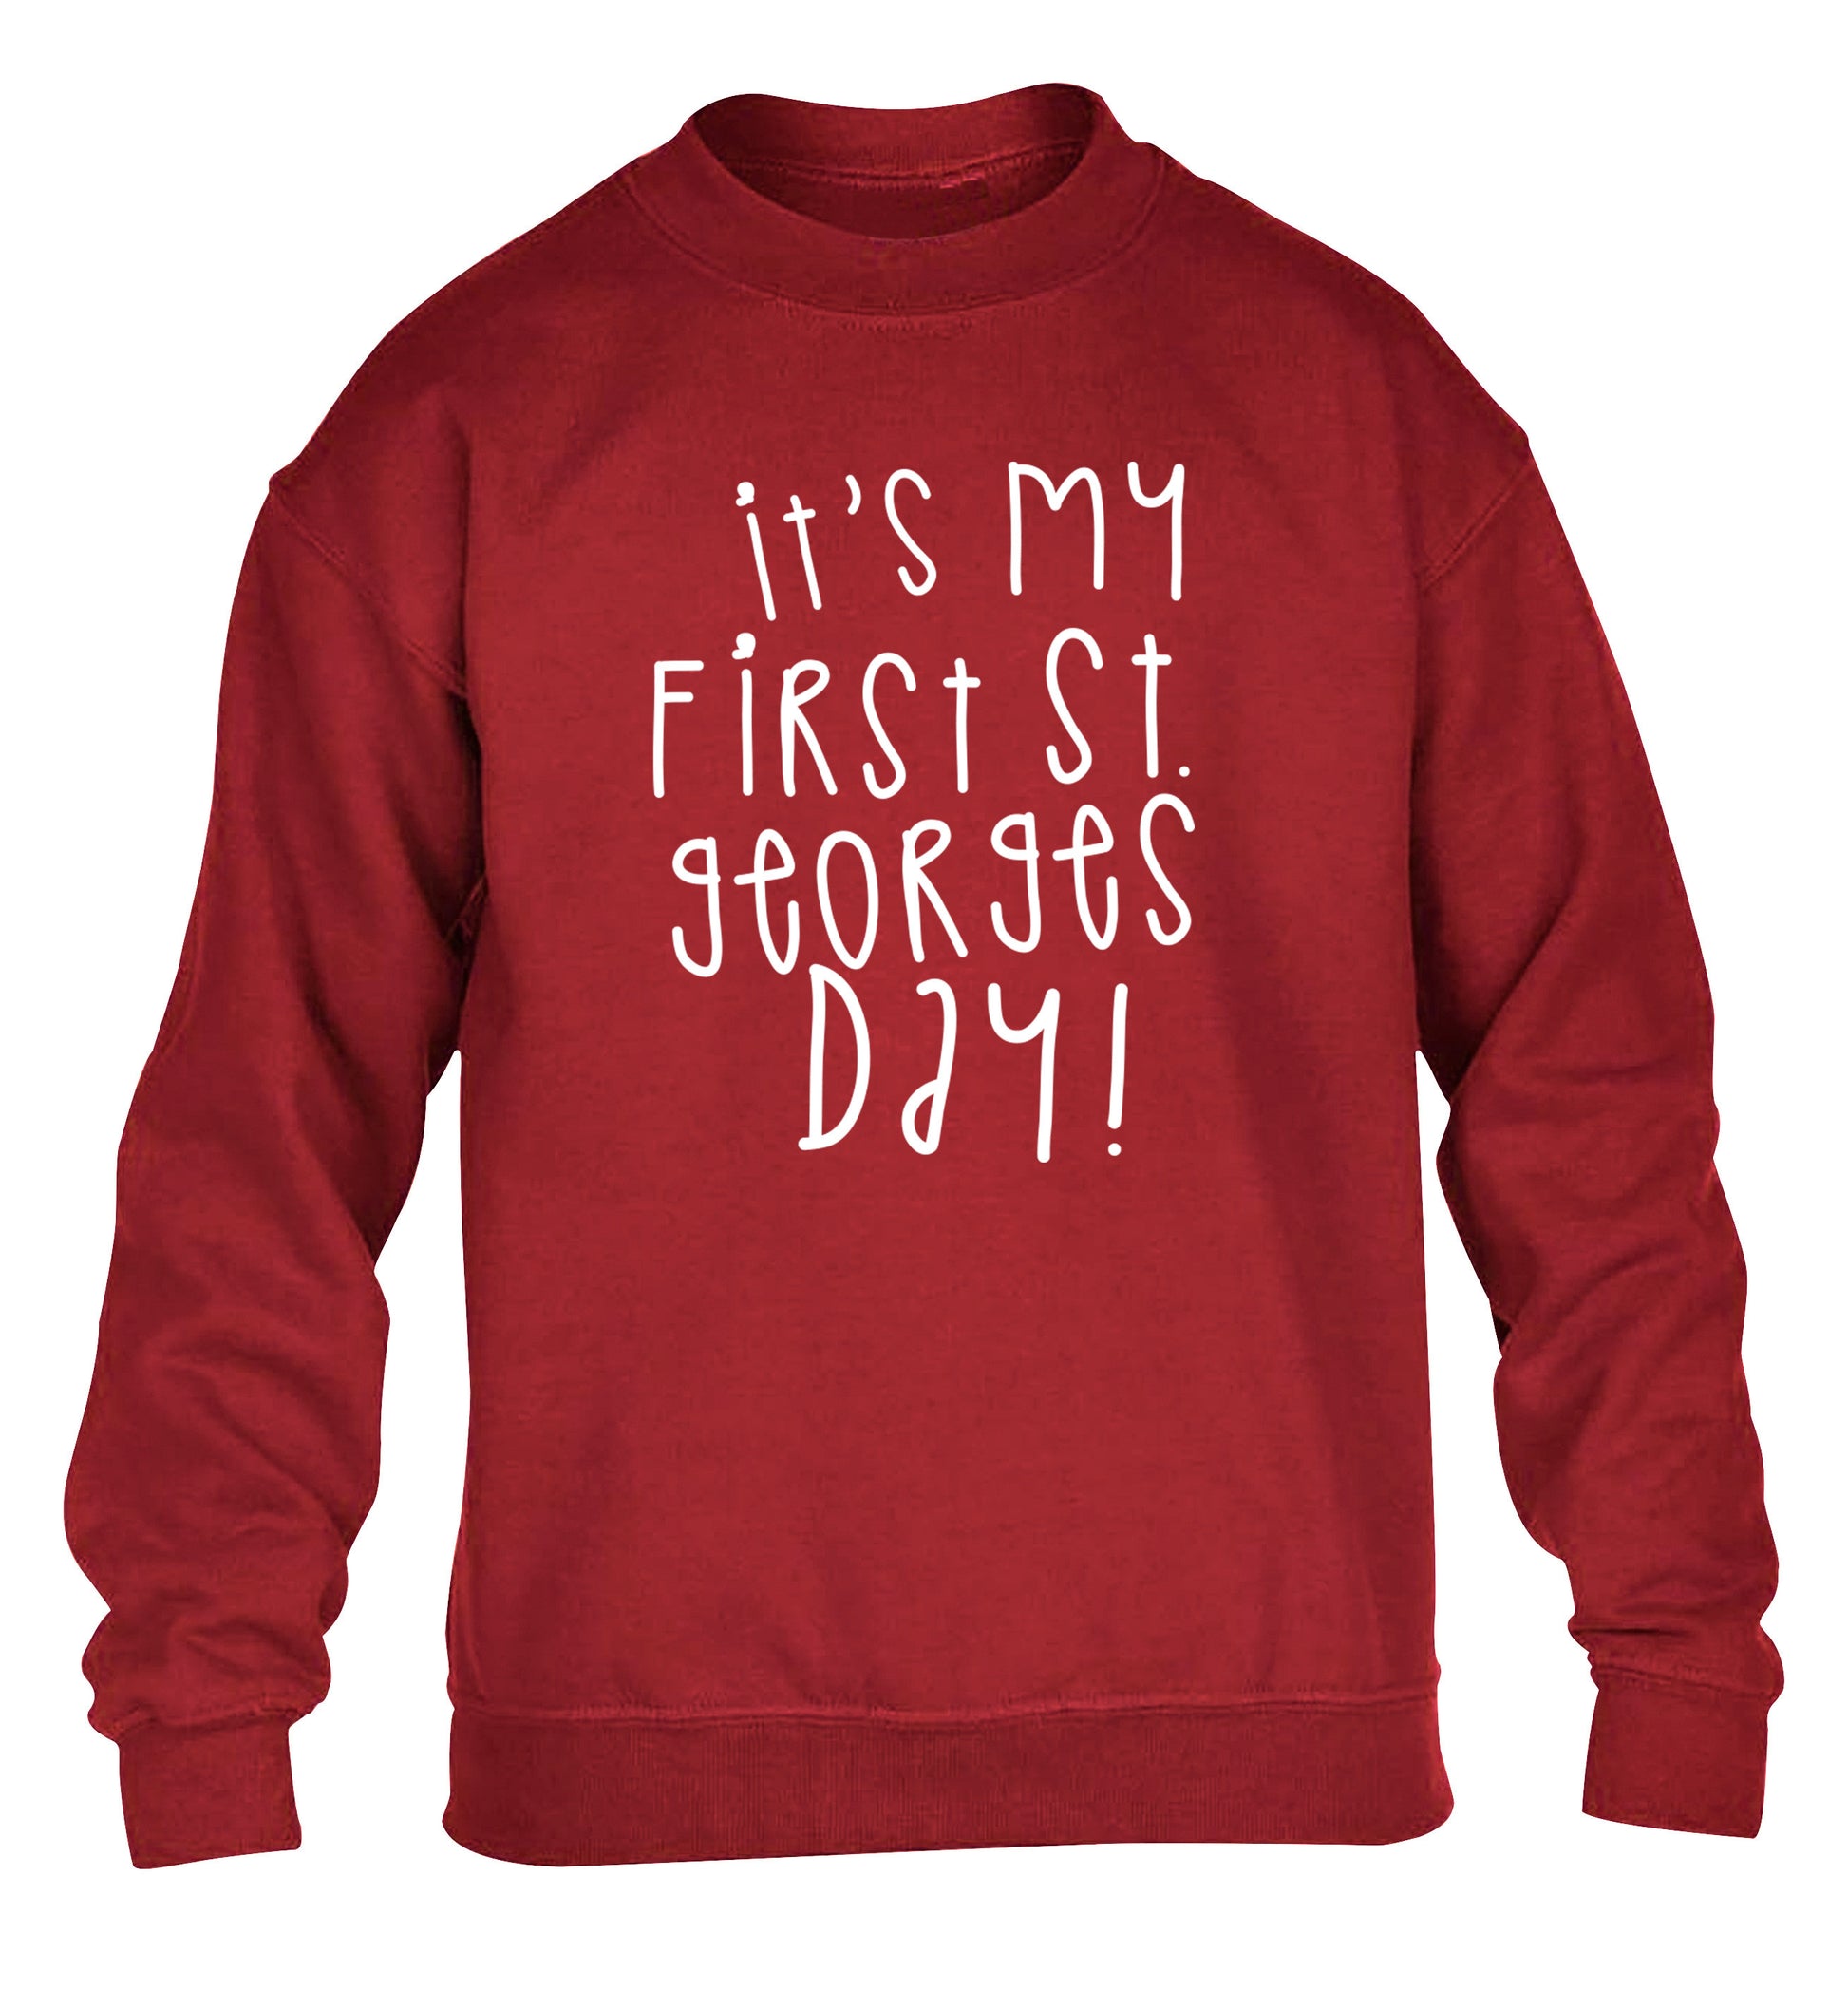 It's my first St Georges day children's grey sweater 12-14 Years